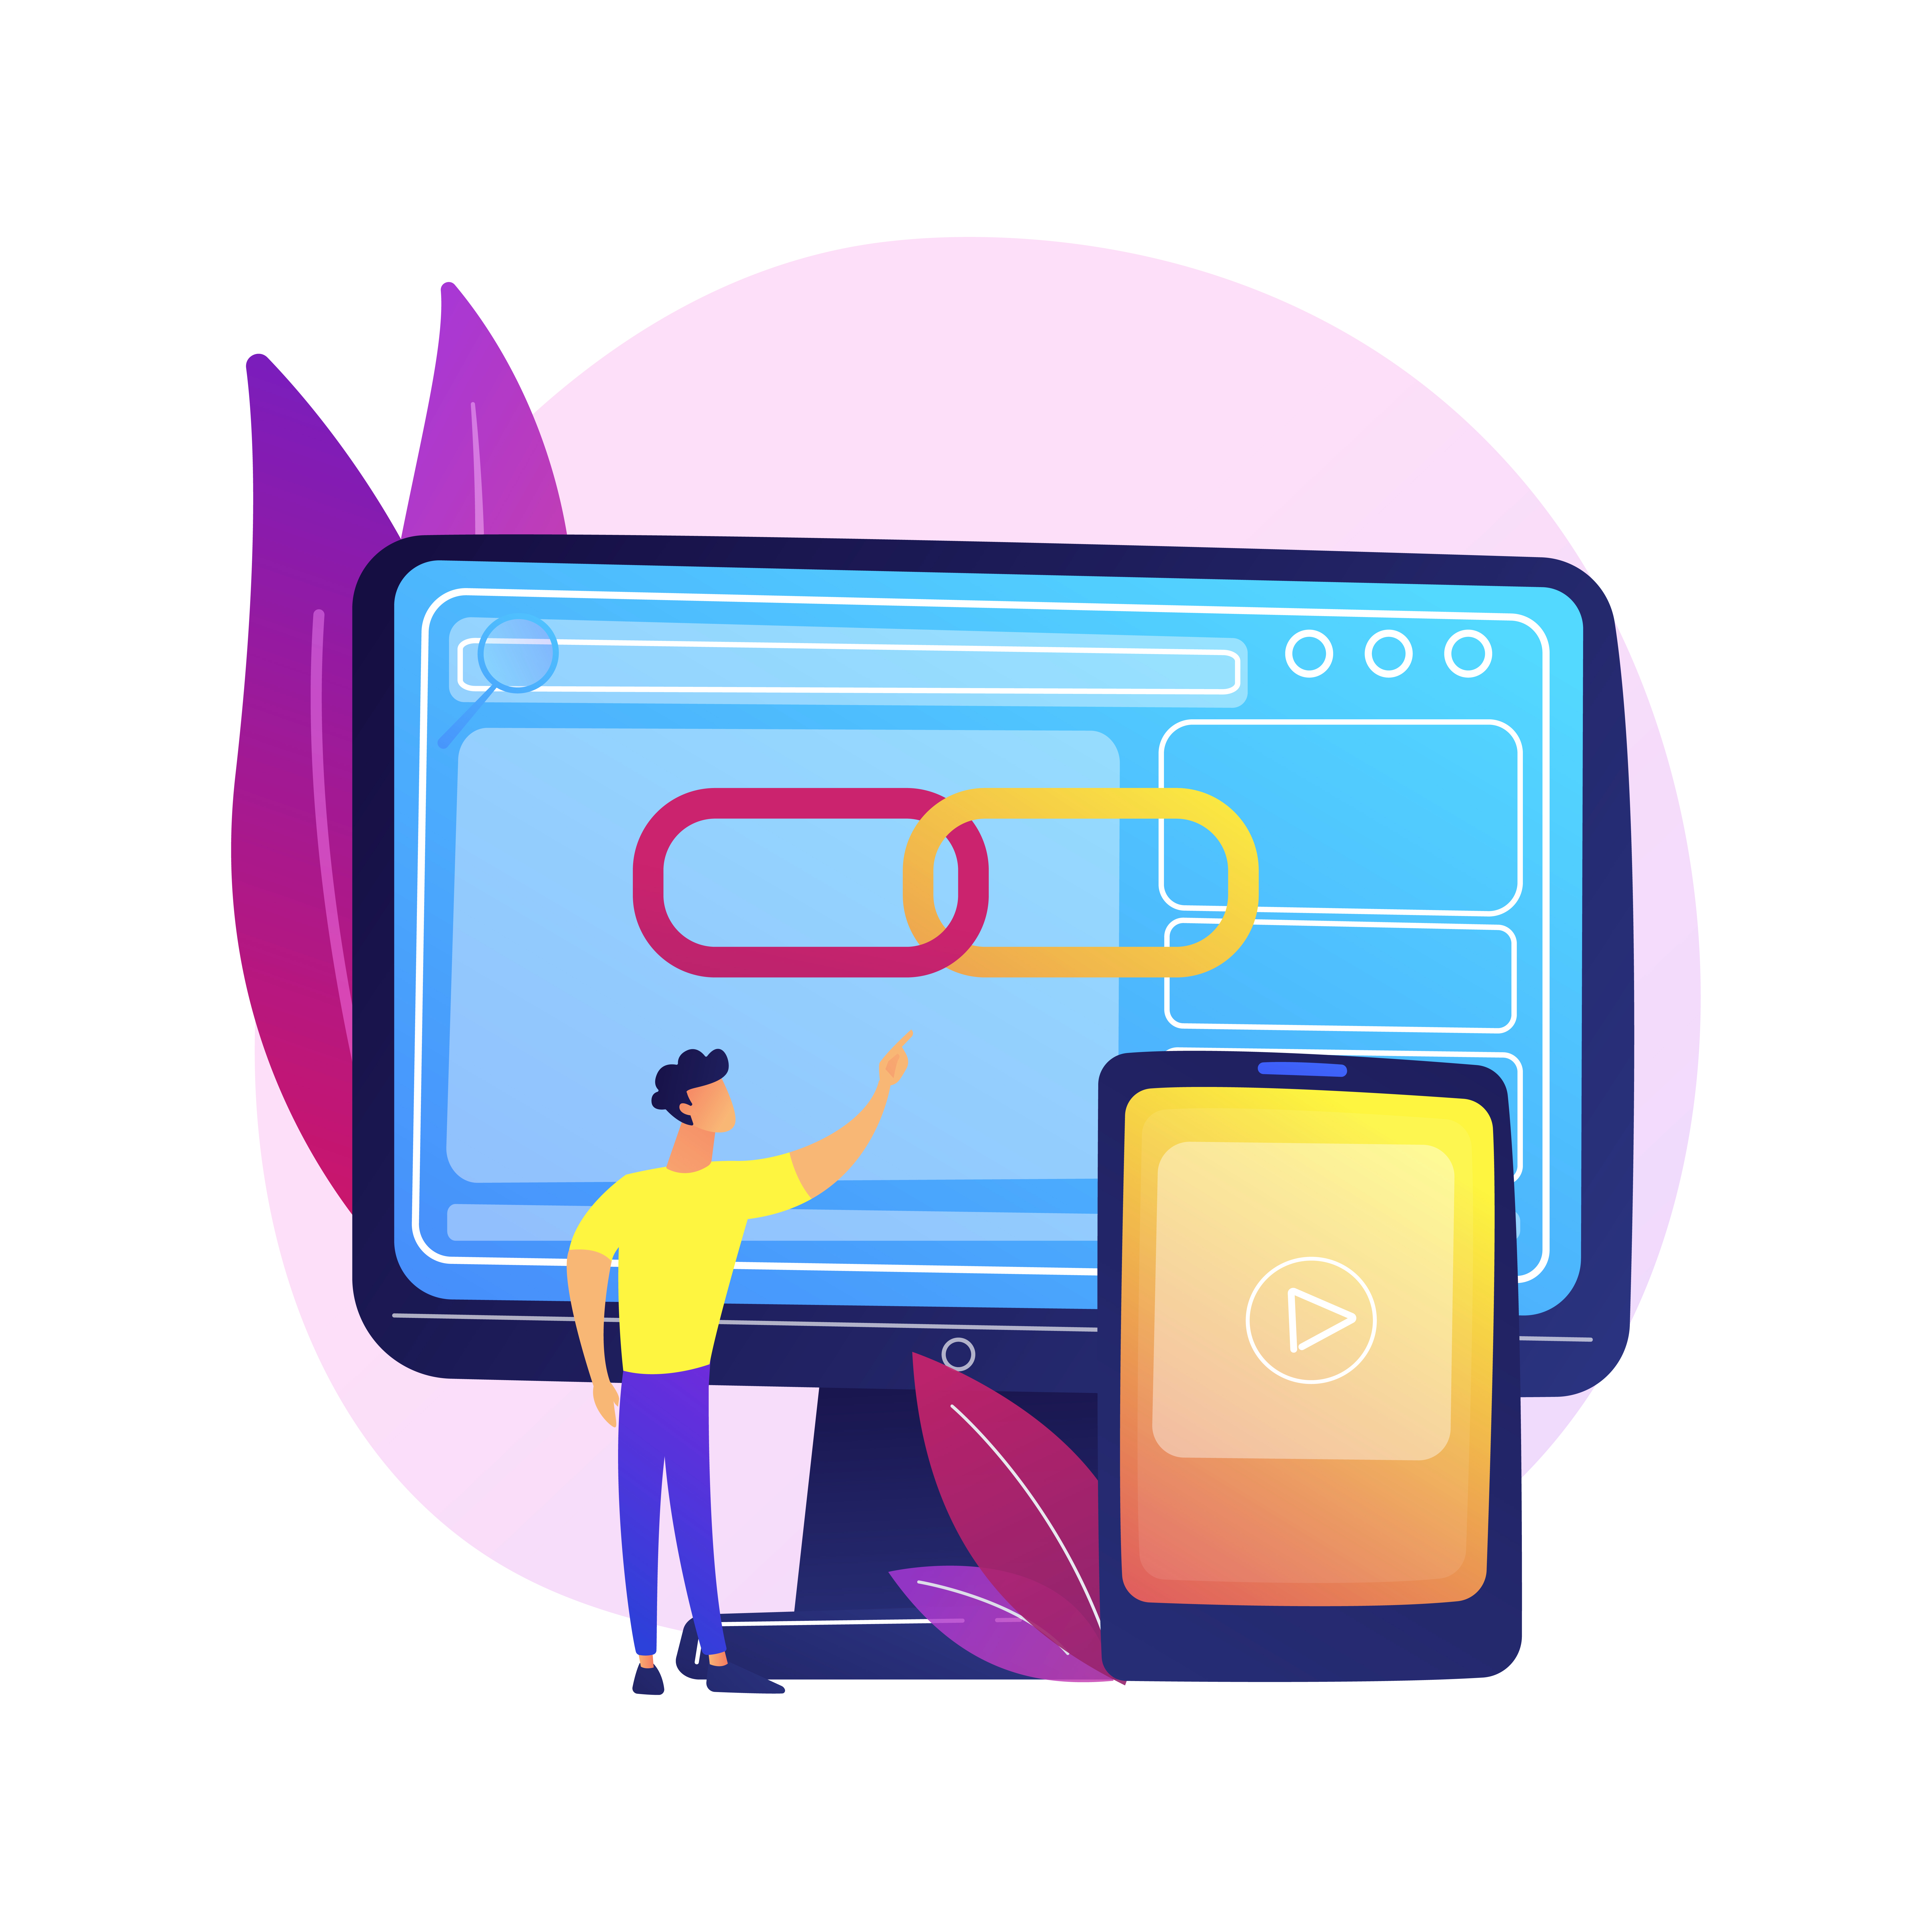 Media player, software, computer application. Geolocation app, location determination function. Male implementor, programmer cartoon character. Vector isolated concept metaphor illustration.